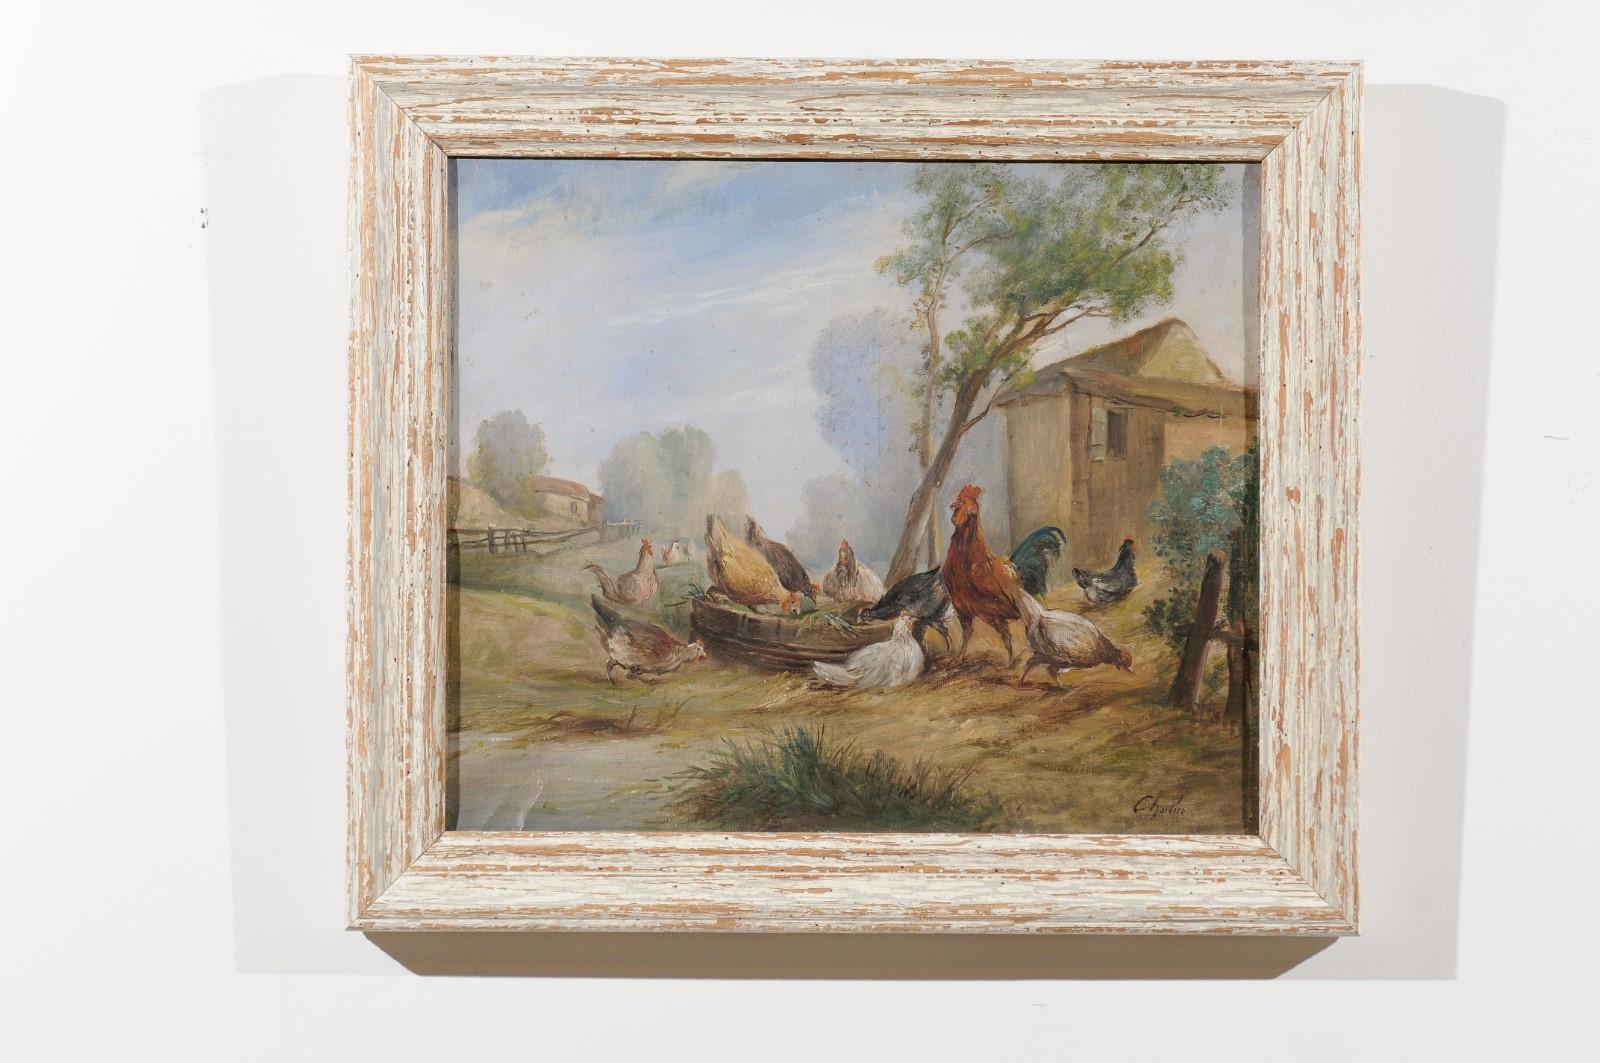 A French framed oil on canvas painting from the 20th century depicting a farmyard scene with hens and rooster. Created in France during the 20th century, this oil on canvas painting depicts a humble farmyard scene. Hens freely roaming and peckering